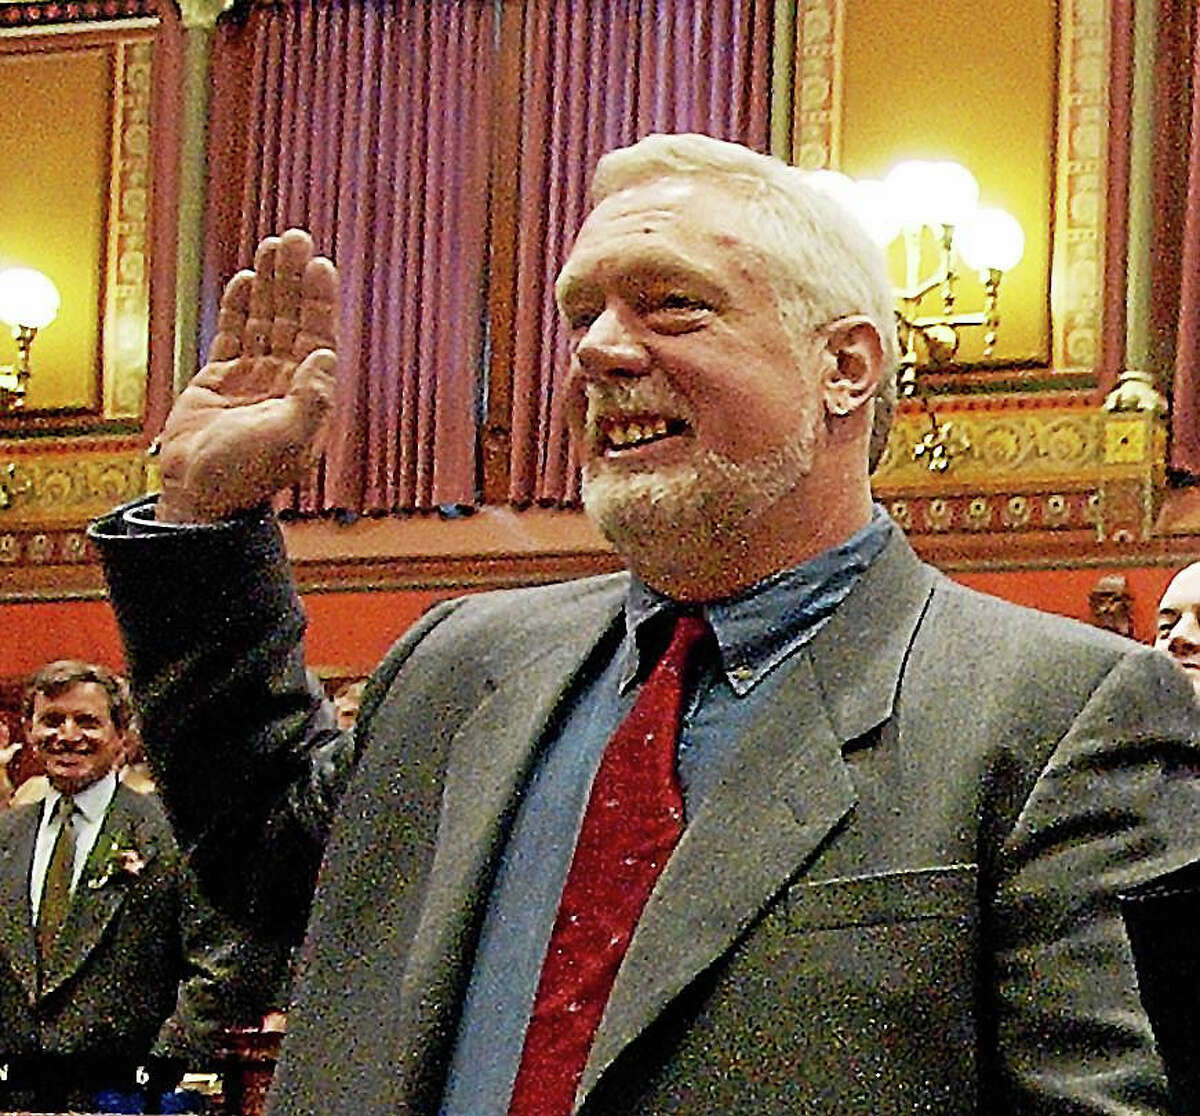 In this 2003 file photo, state Rep. Terry Backer, D-Stratford, takes the oath of office in the Hall of the House at the state Capitol in Hartford.